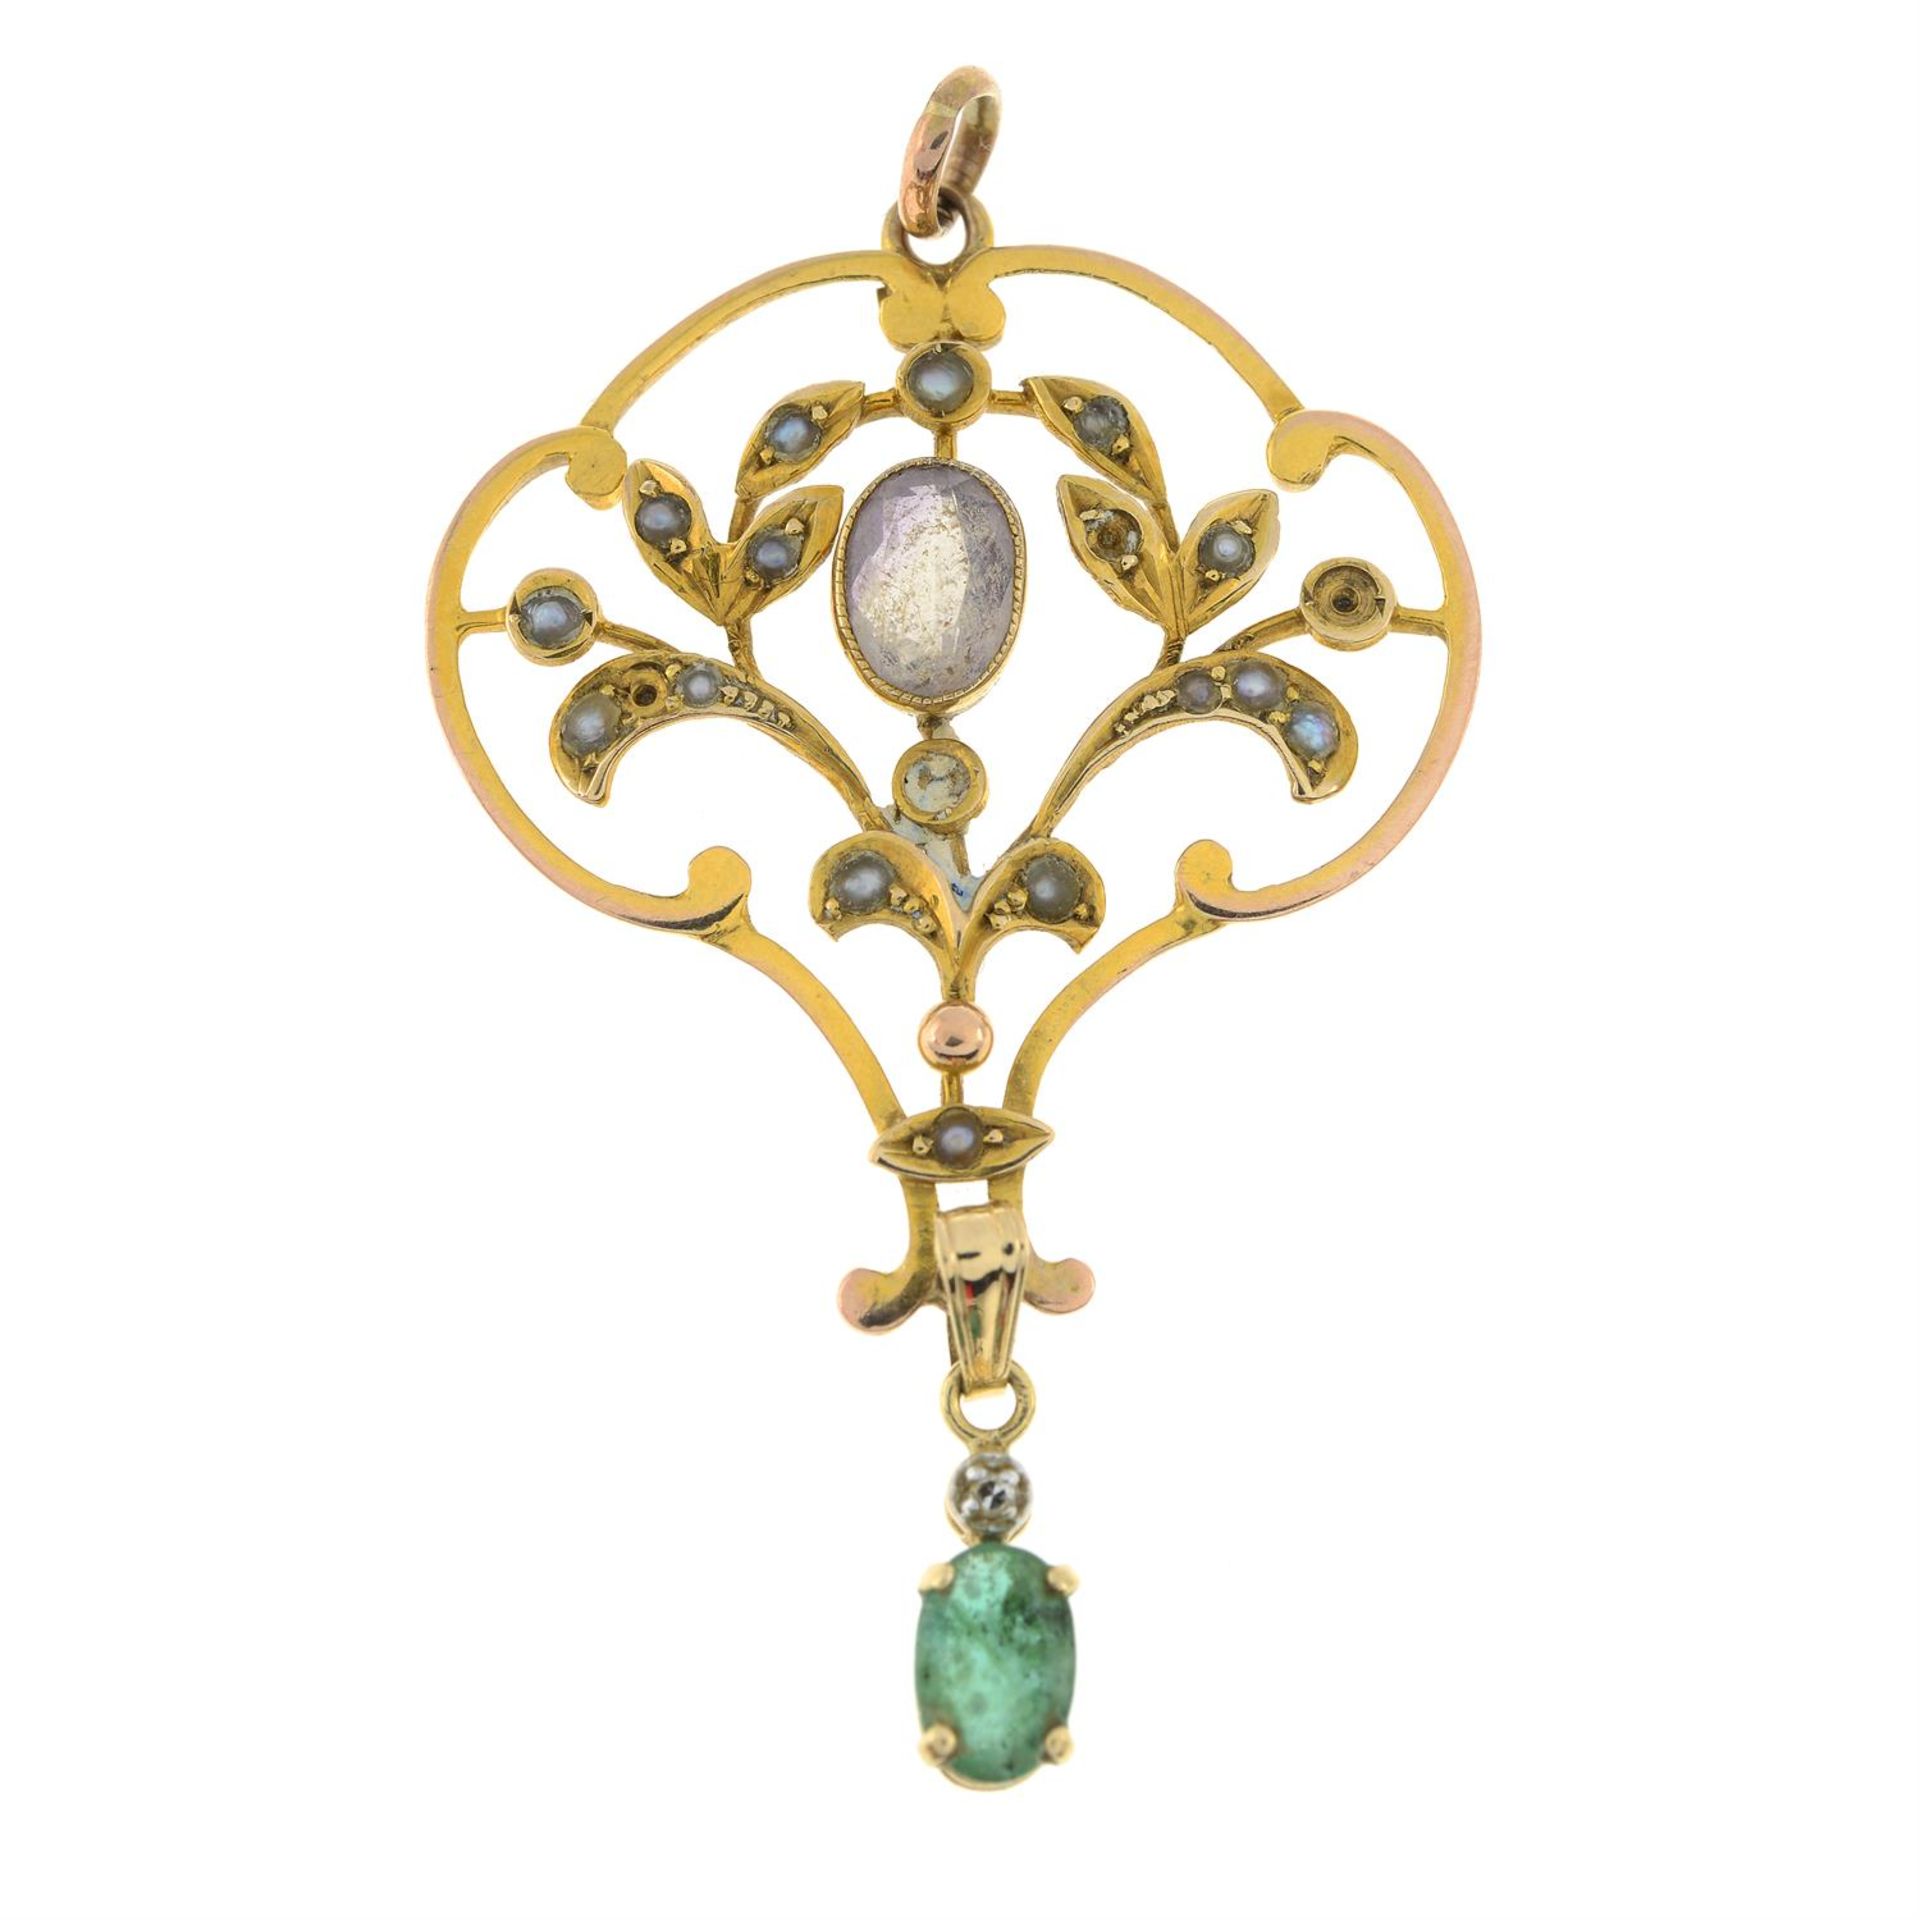 Early 20th century 9ct gold amethyst and split pearl openwork pendant, with later emerald and